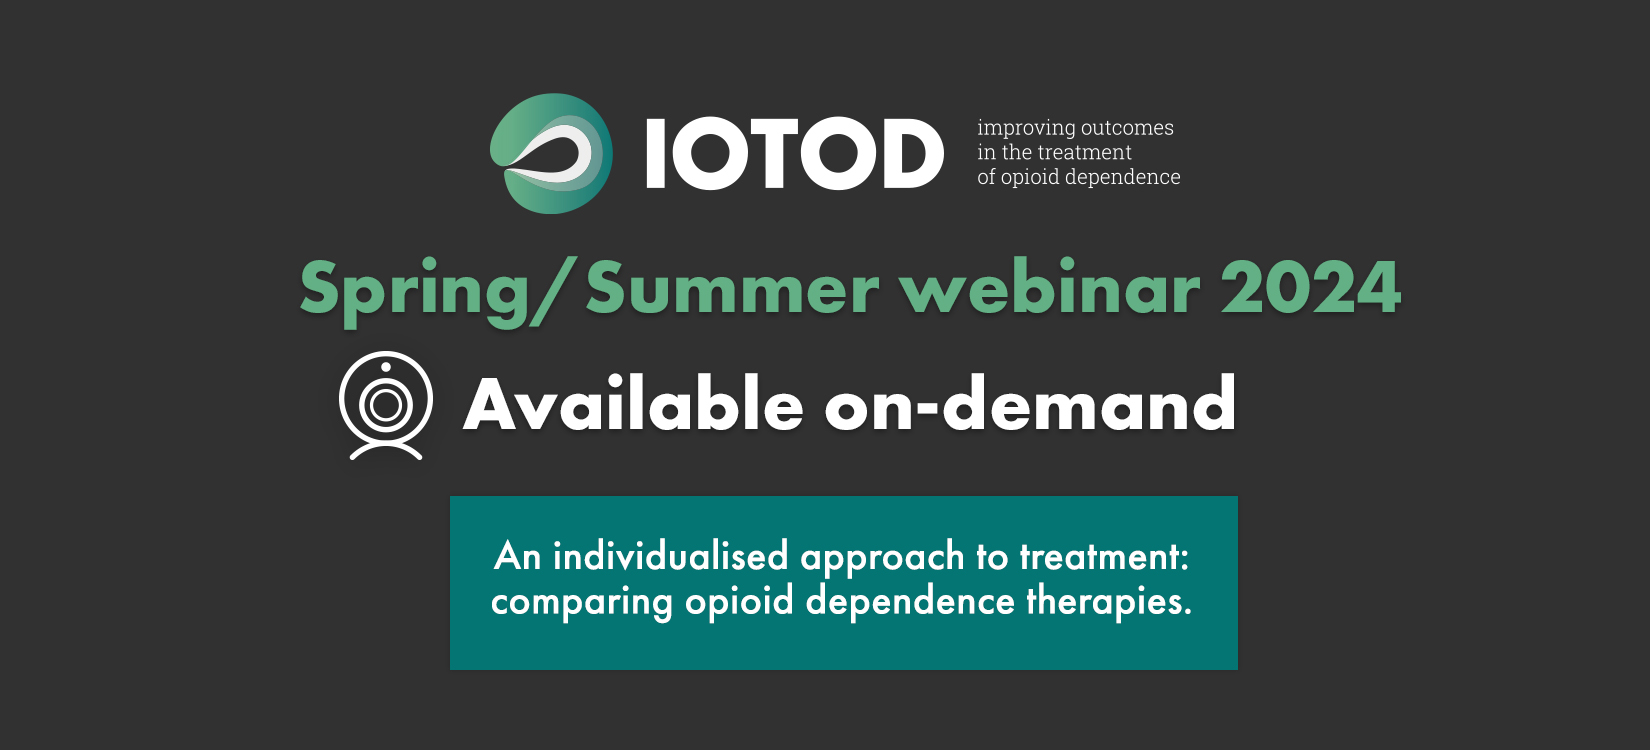 Delivery of the IOTOD Spring/Summer webinar